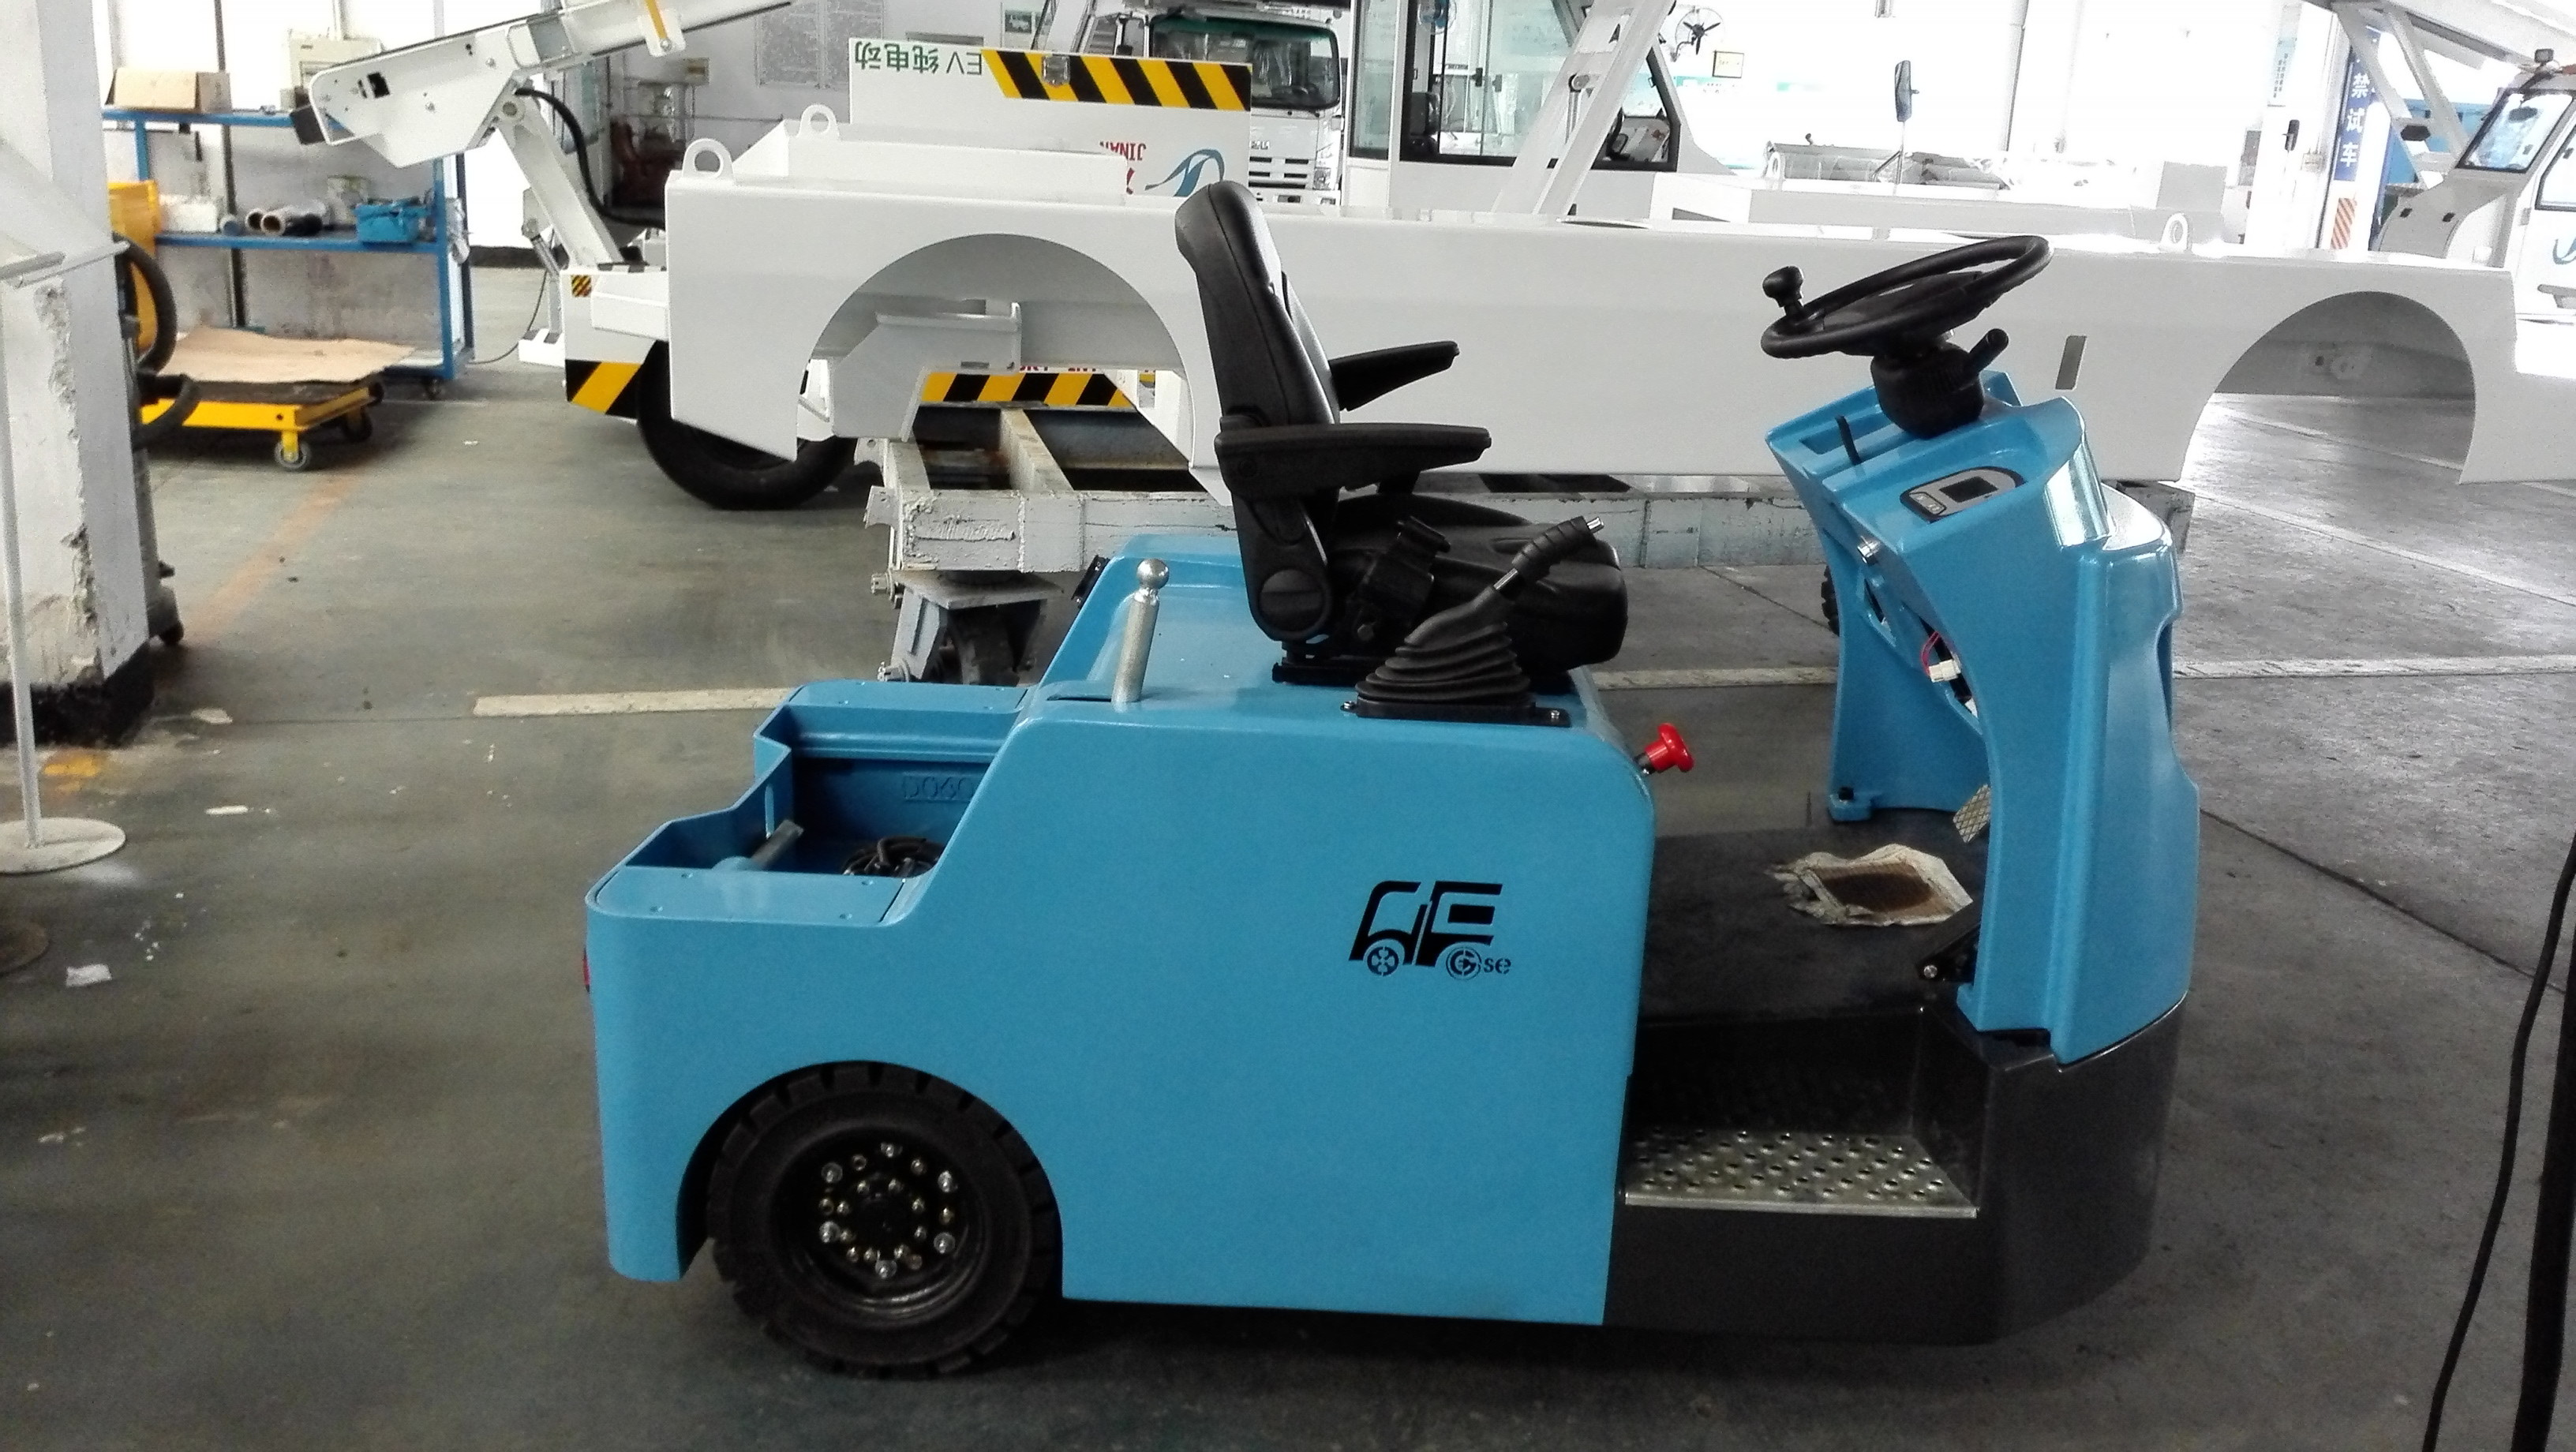 Blue Baggage Towing Tractor Carbon Steel Material With Lead Acid Battery